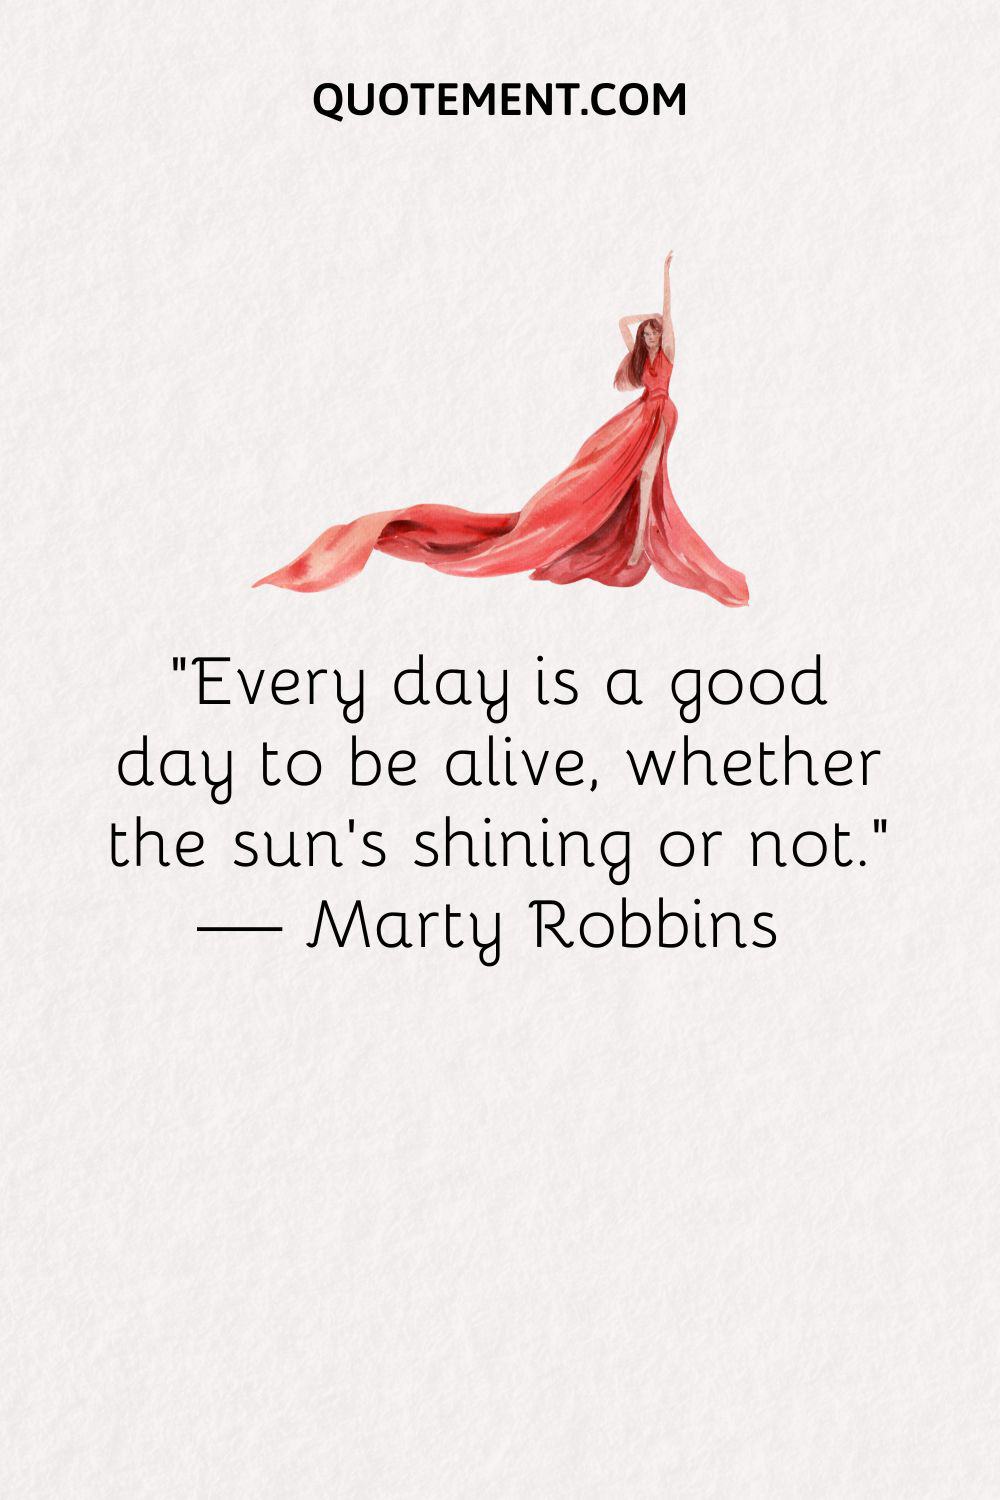 “Every day is a good day to be alive, whether the sun’s shining or not.” — Marty Robbins